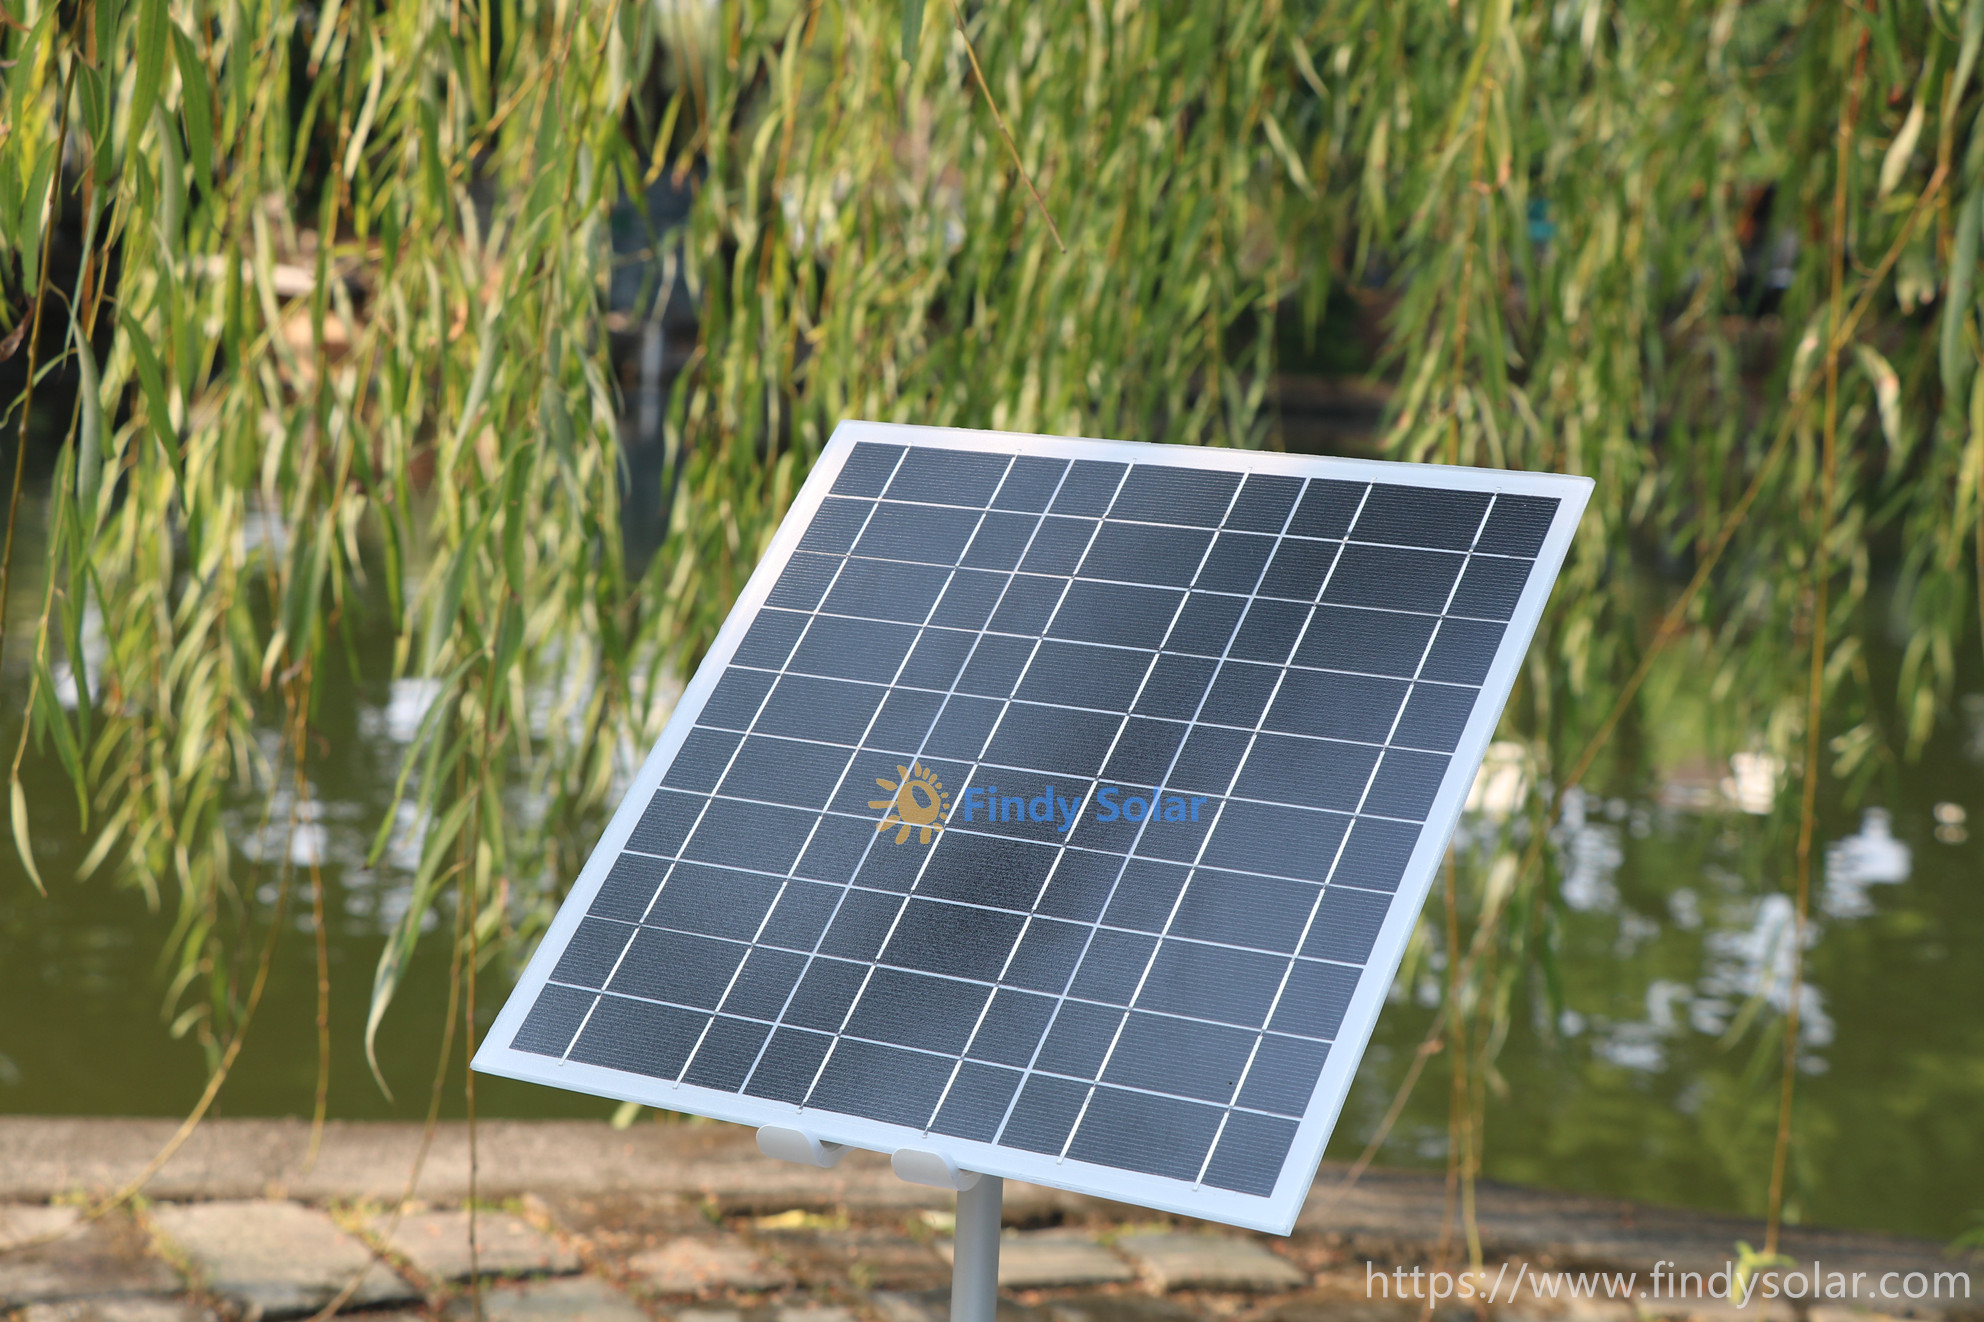 How to choose the right solar panel for your battery?